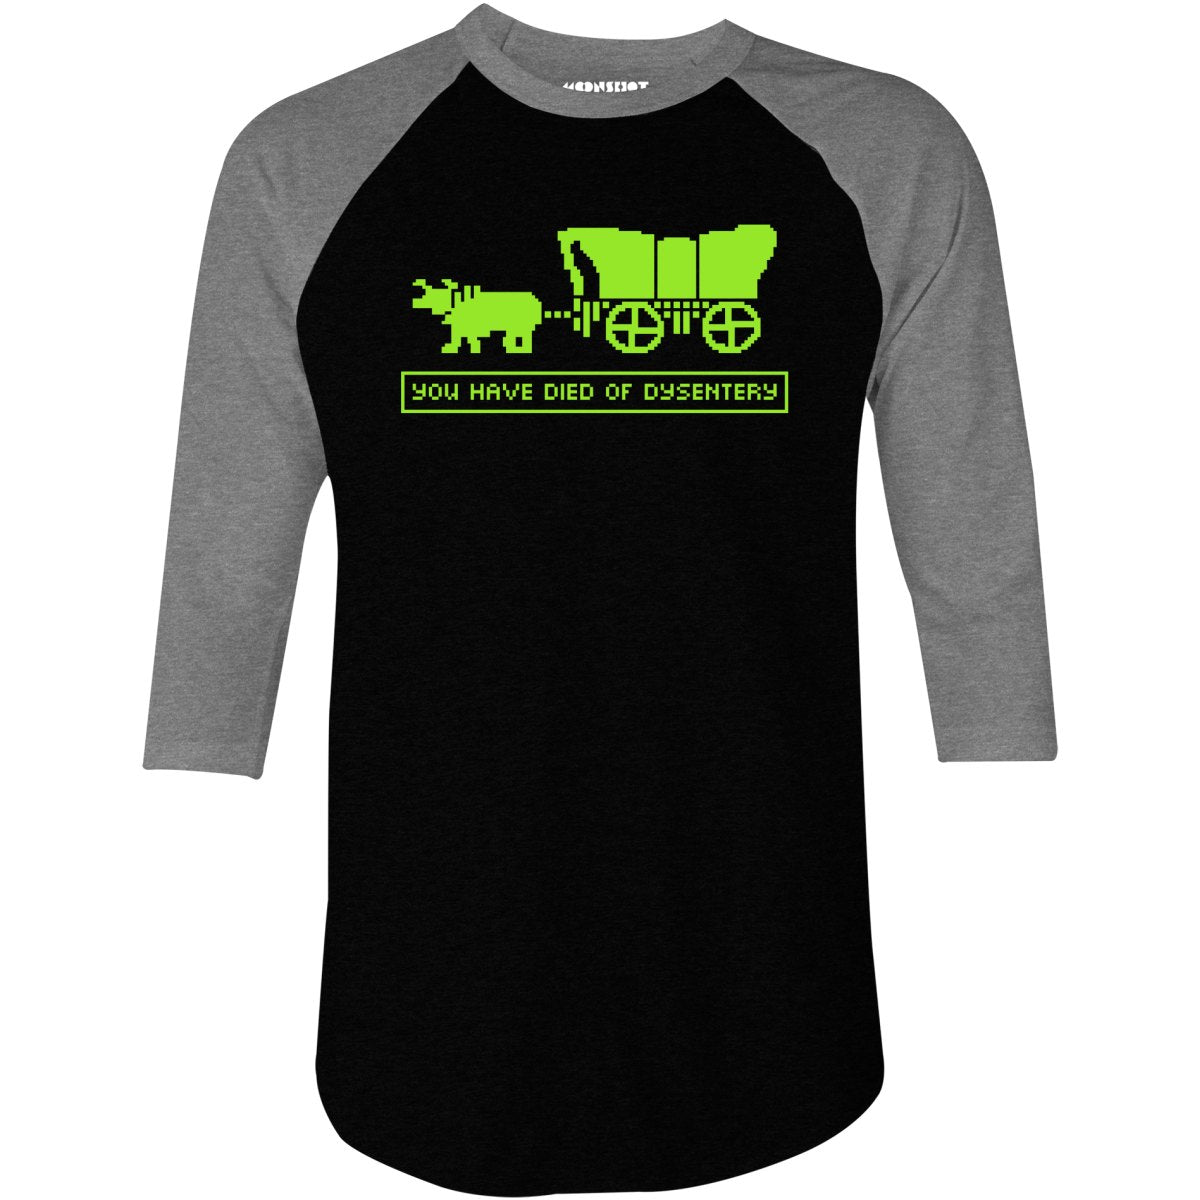 You Have Died of Dysentery - 3/4 Sleeve Raglan T-Shirt